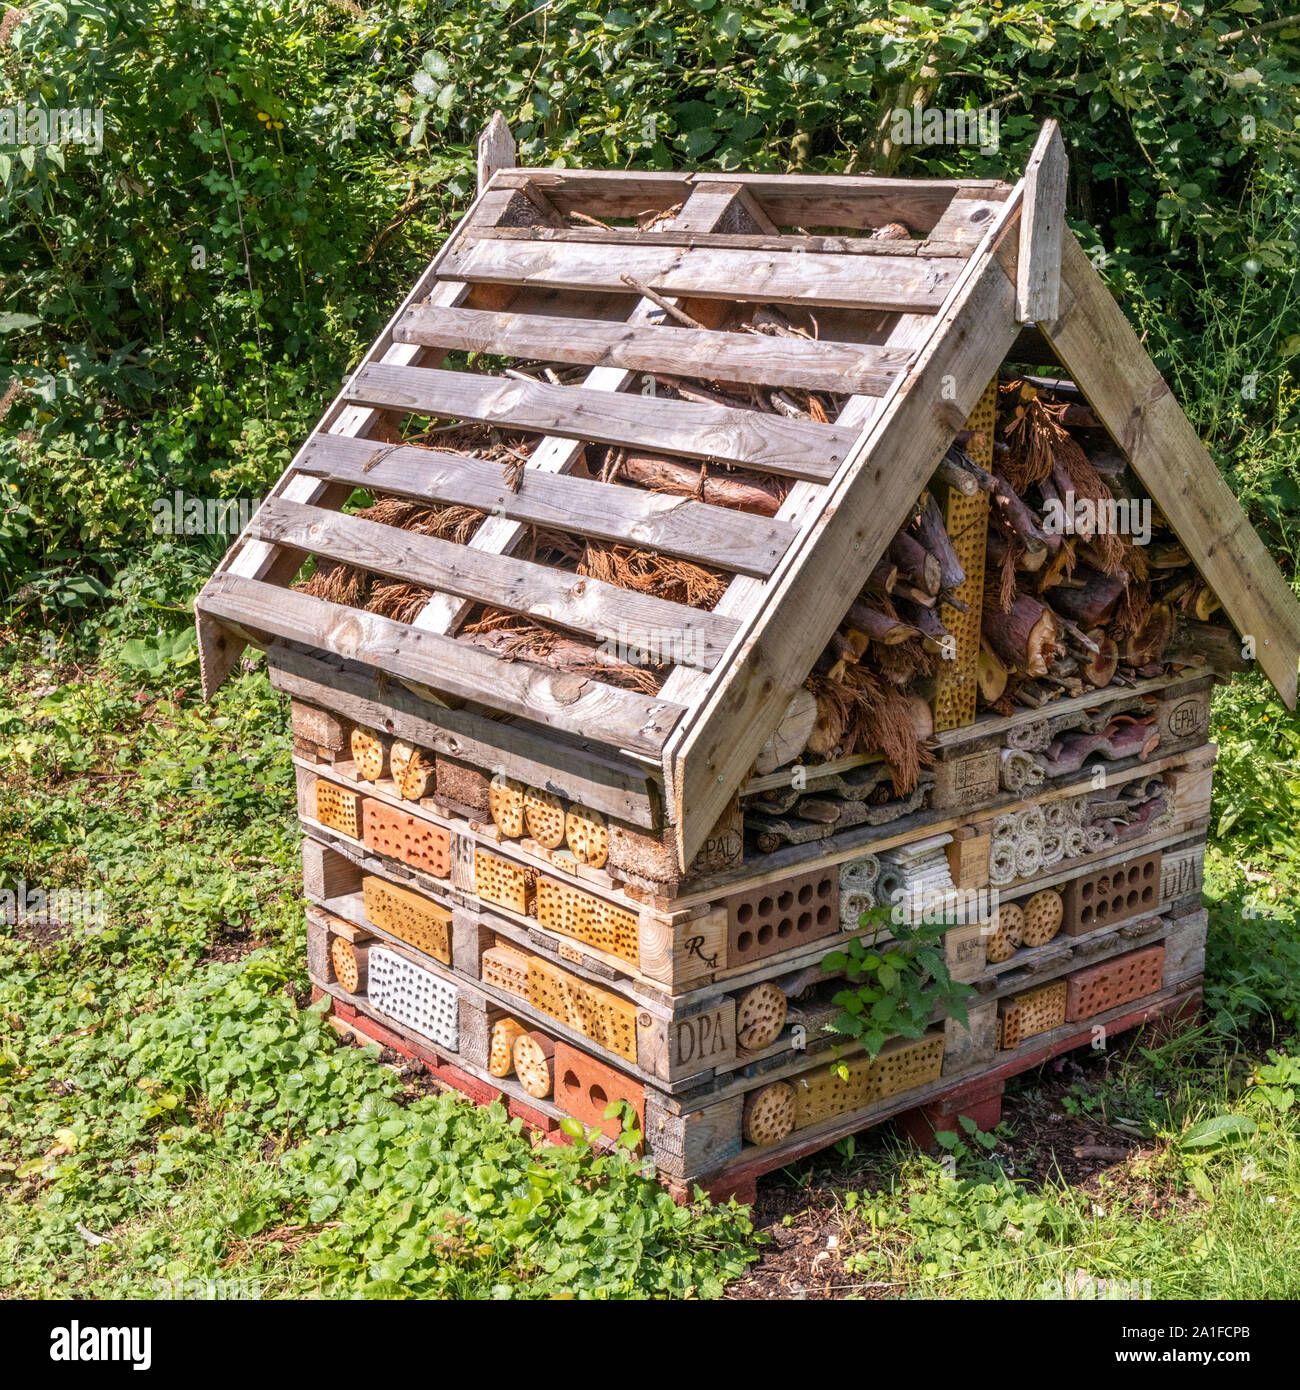 A multi faceted bug hotel in the grounds of Nature in Art museum and art gallery at Wallsworth Hall, Twigworth, Gloucestershire UK Stock Photo